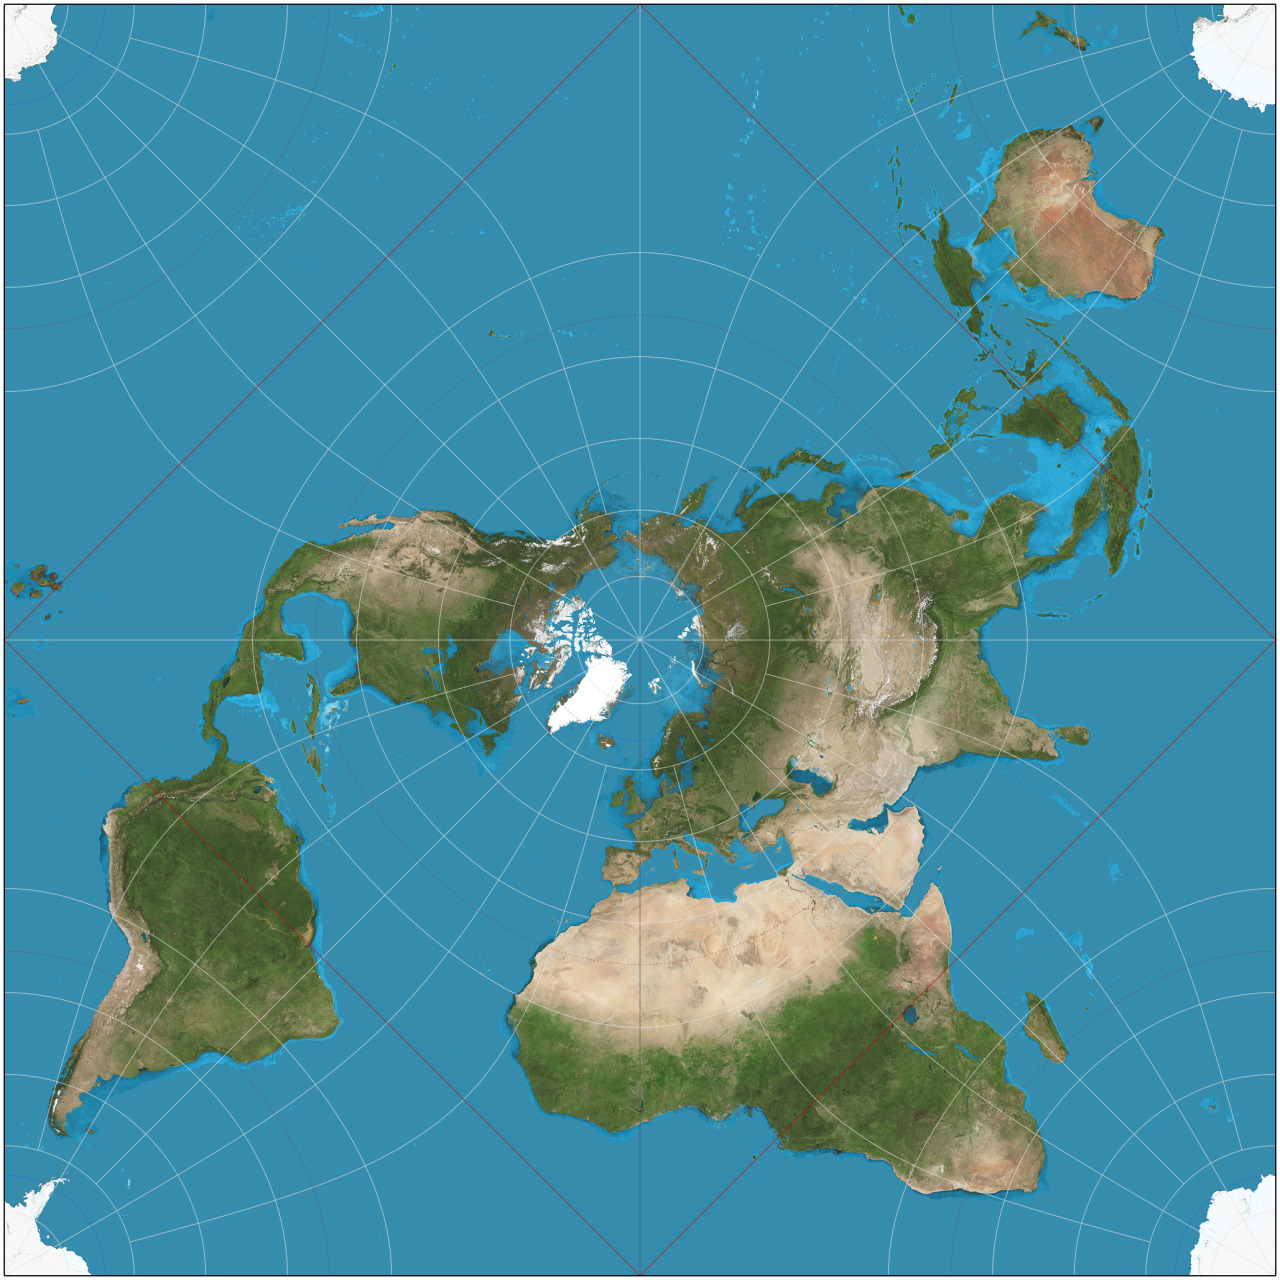 foresail:The Peirce quincuncial map projection will change your perspective on the